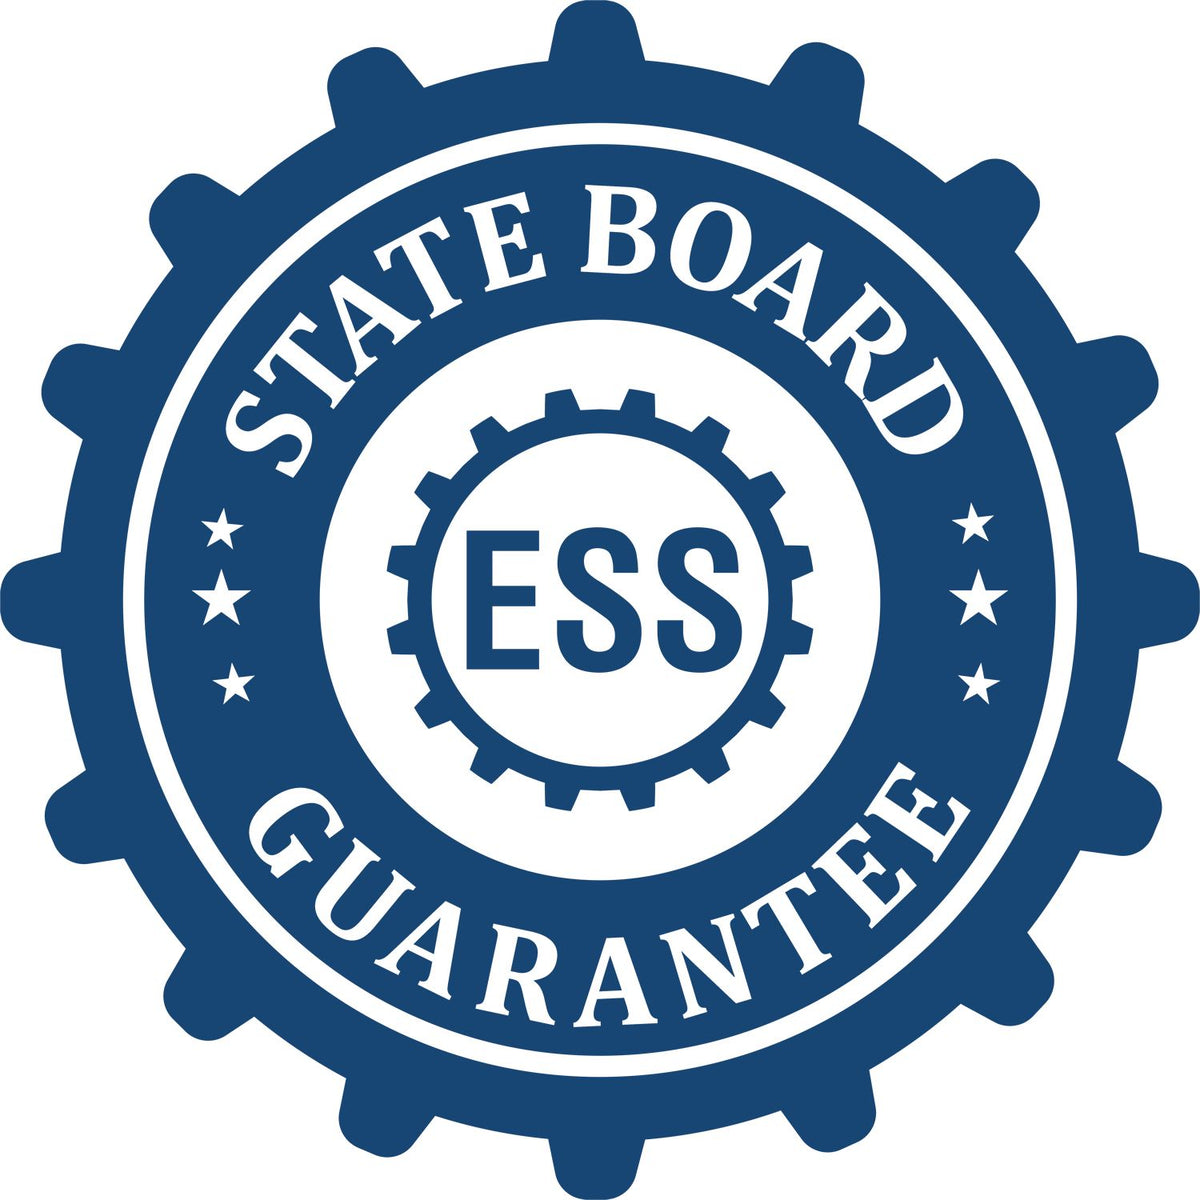 An emblem in a gear shape illustrating a state board guarantee for the Handheld Indiana Professional Geologist Embosser